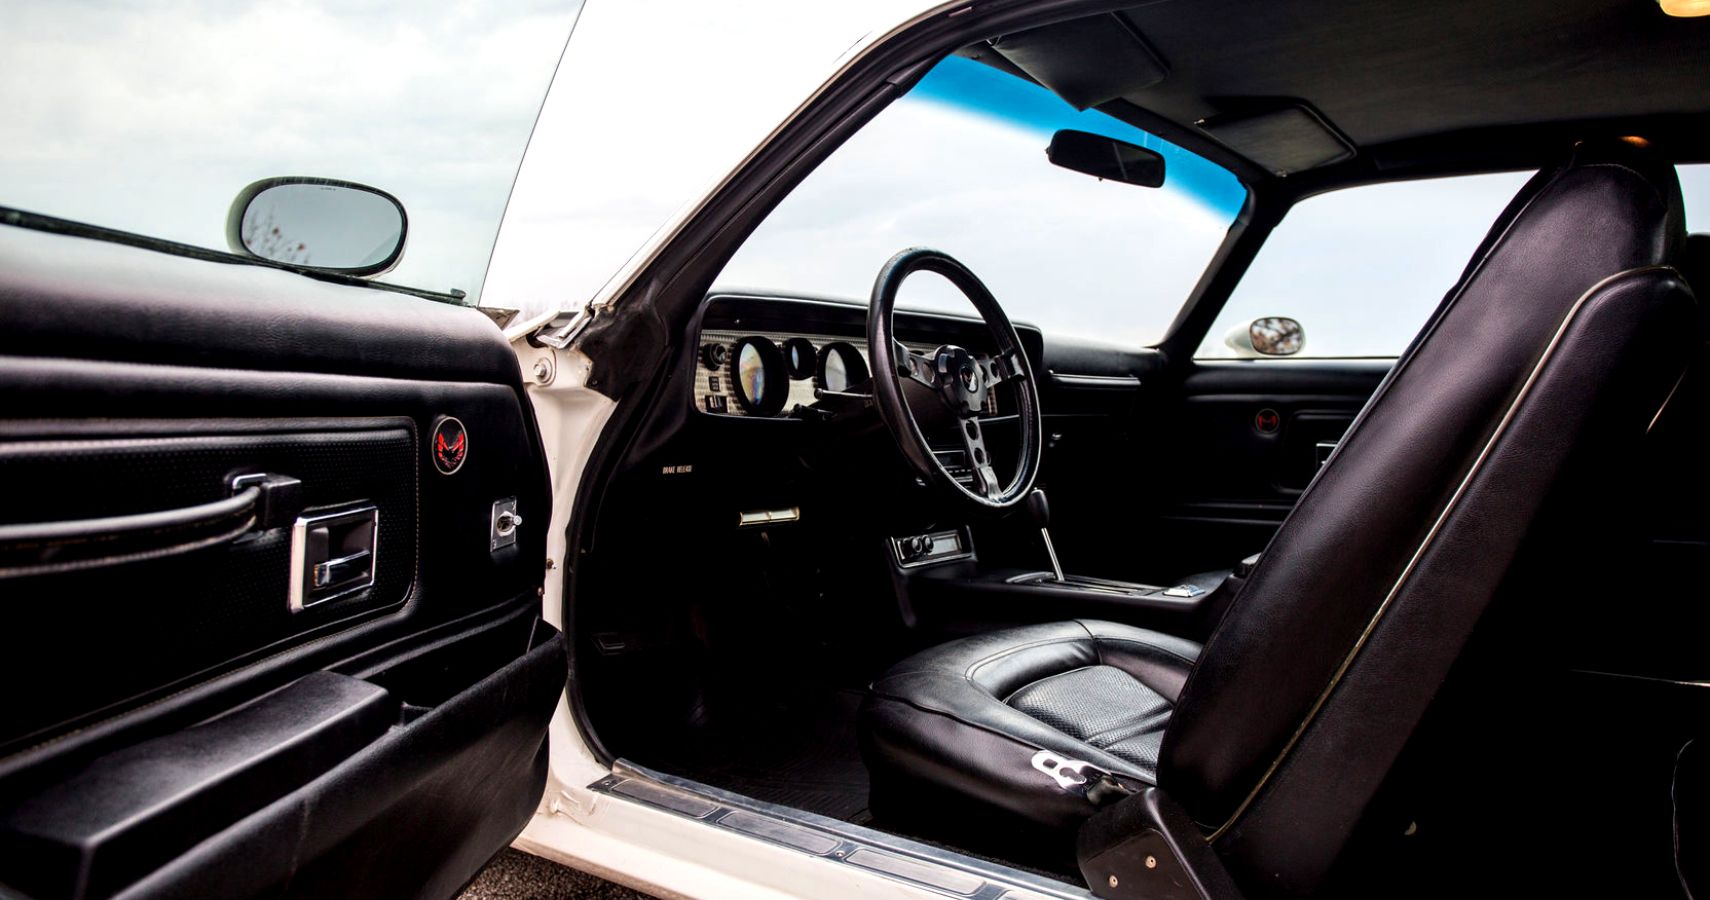 10 Classic American Cars That Had The Best Interiors